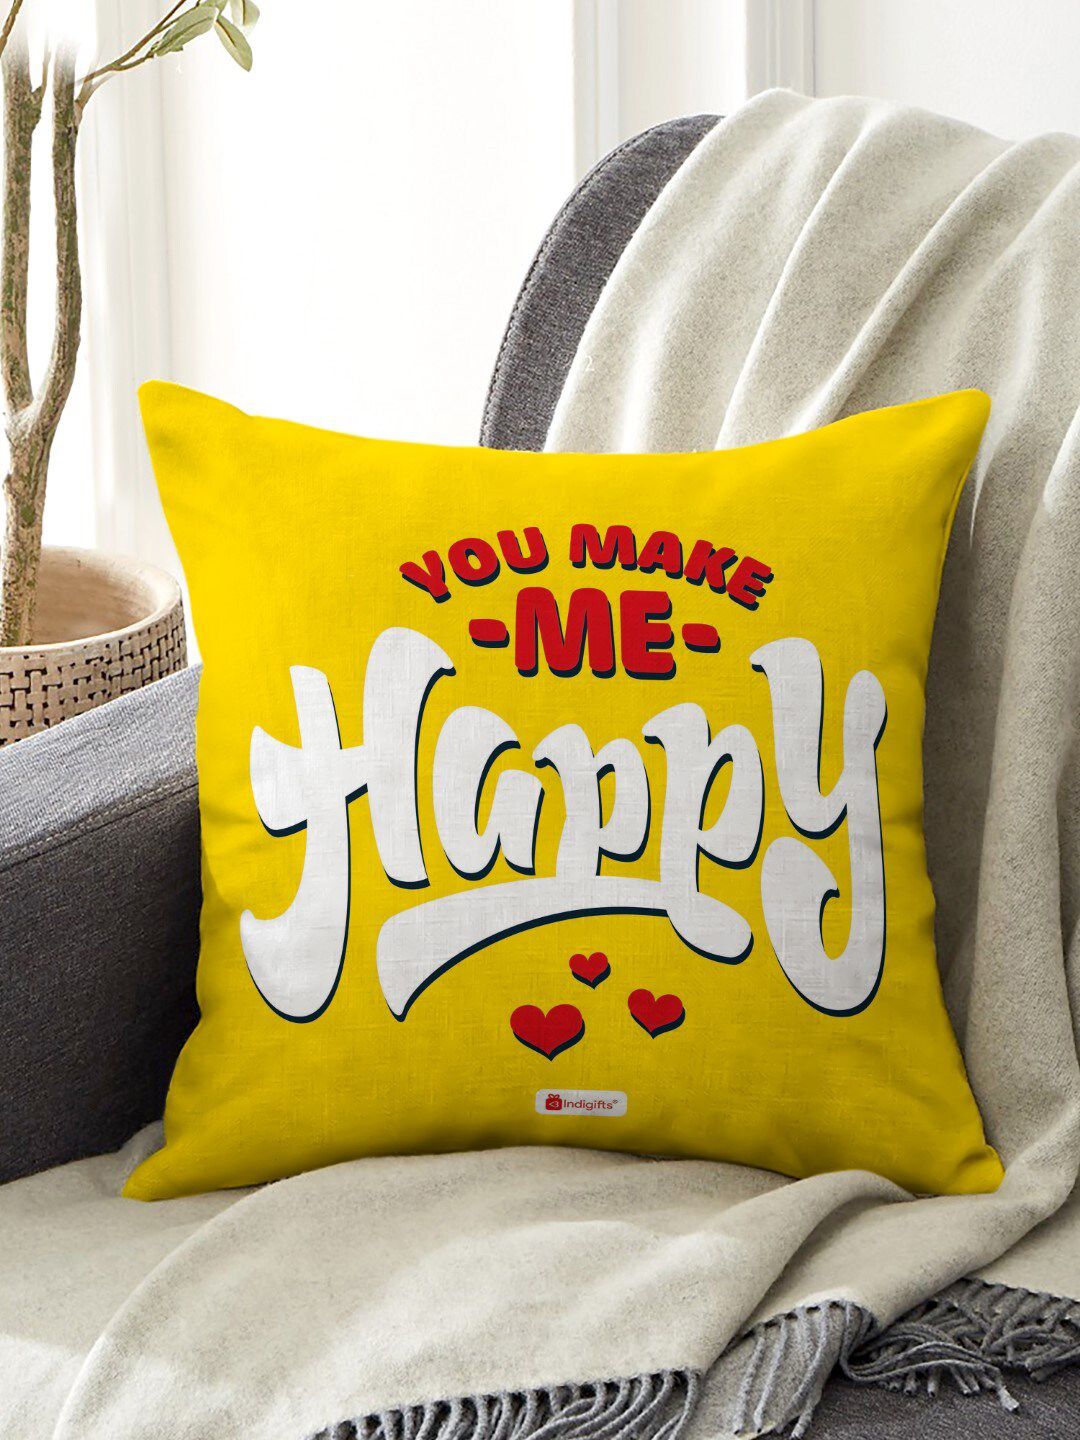 Indigifts Yellow & Red Printed Cushion Cover Price in India